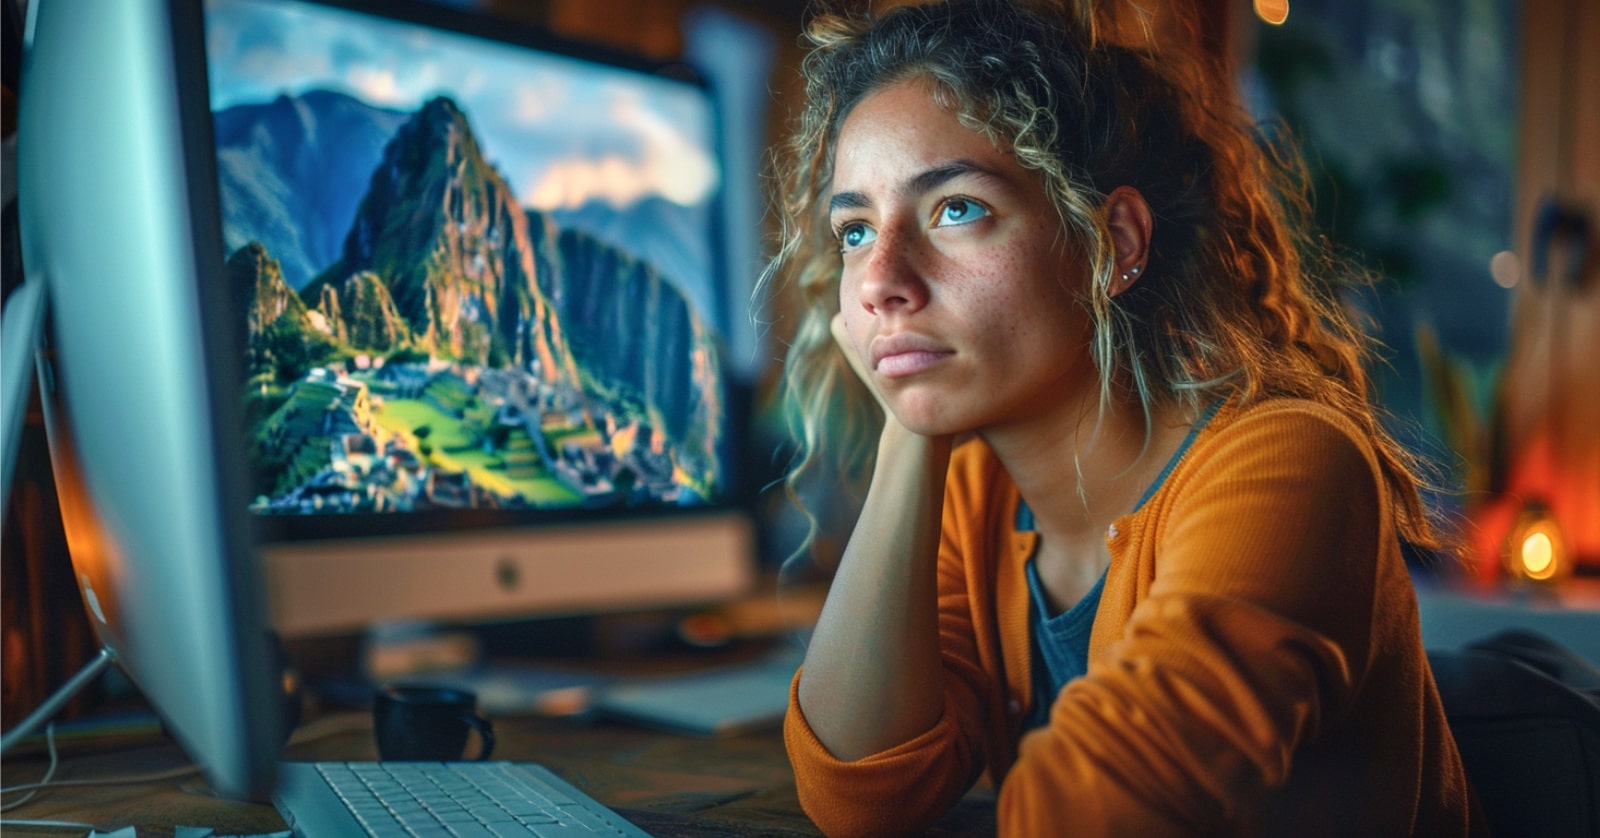 an unfulfilled young woman sitting in her dark bedroom staring longingly at her computer screen which has images of Machu Picchu on it